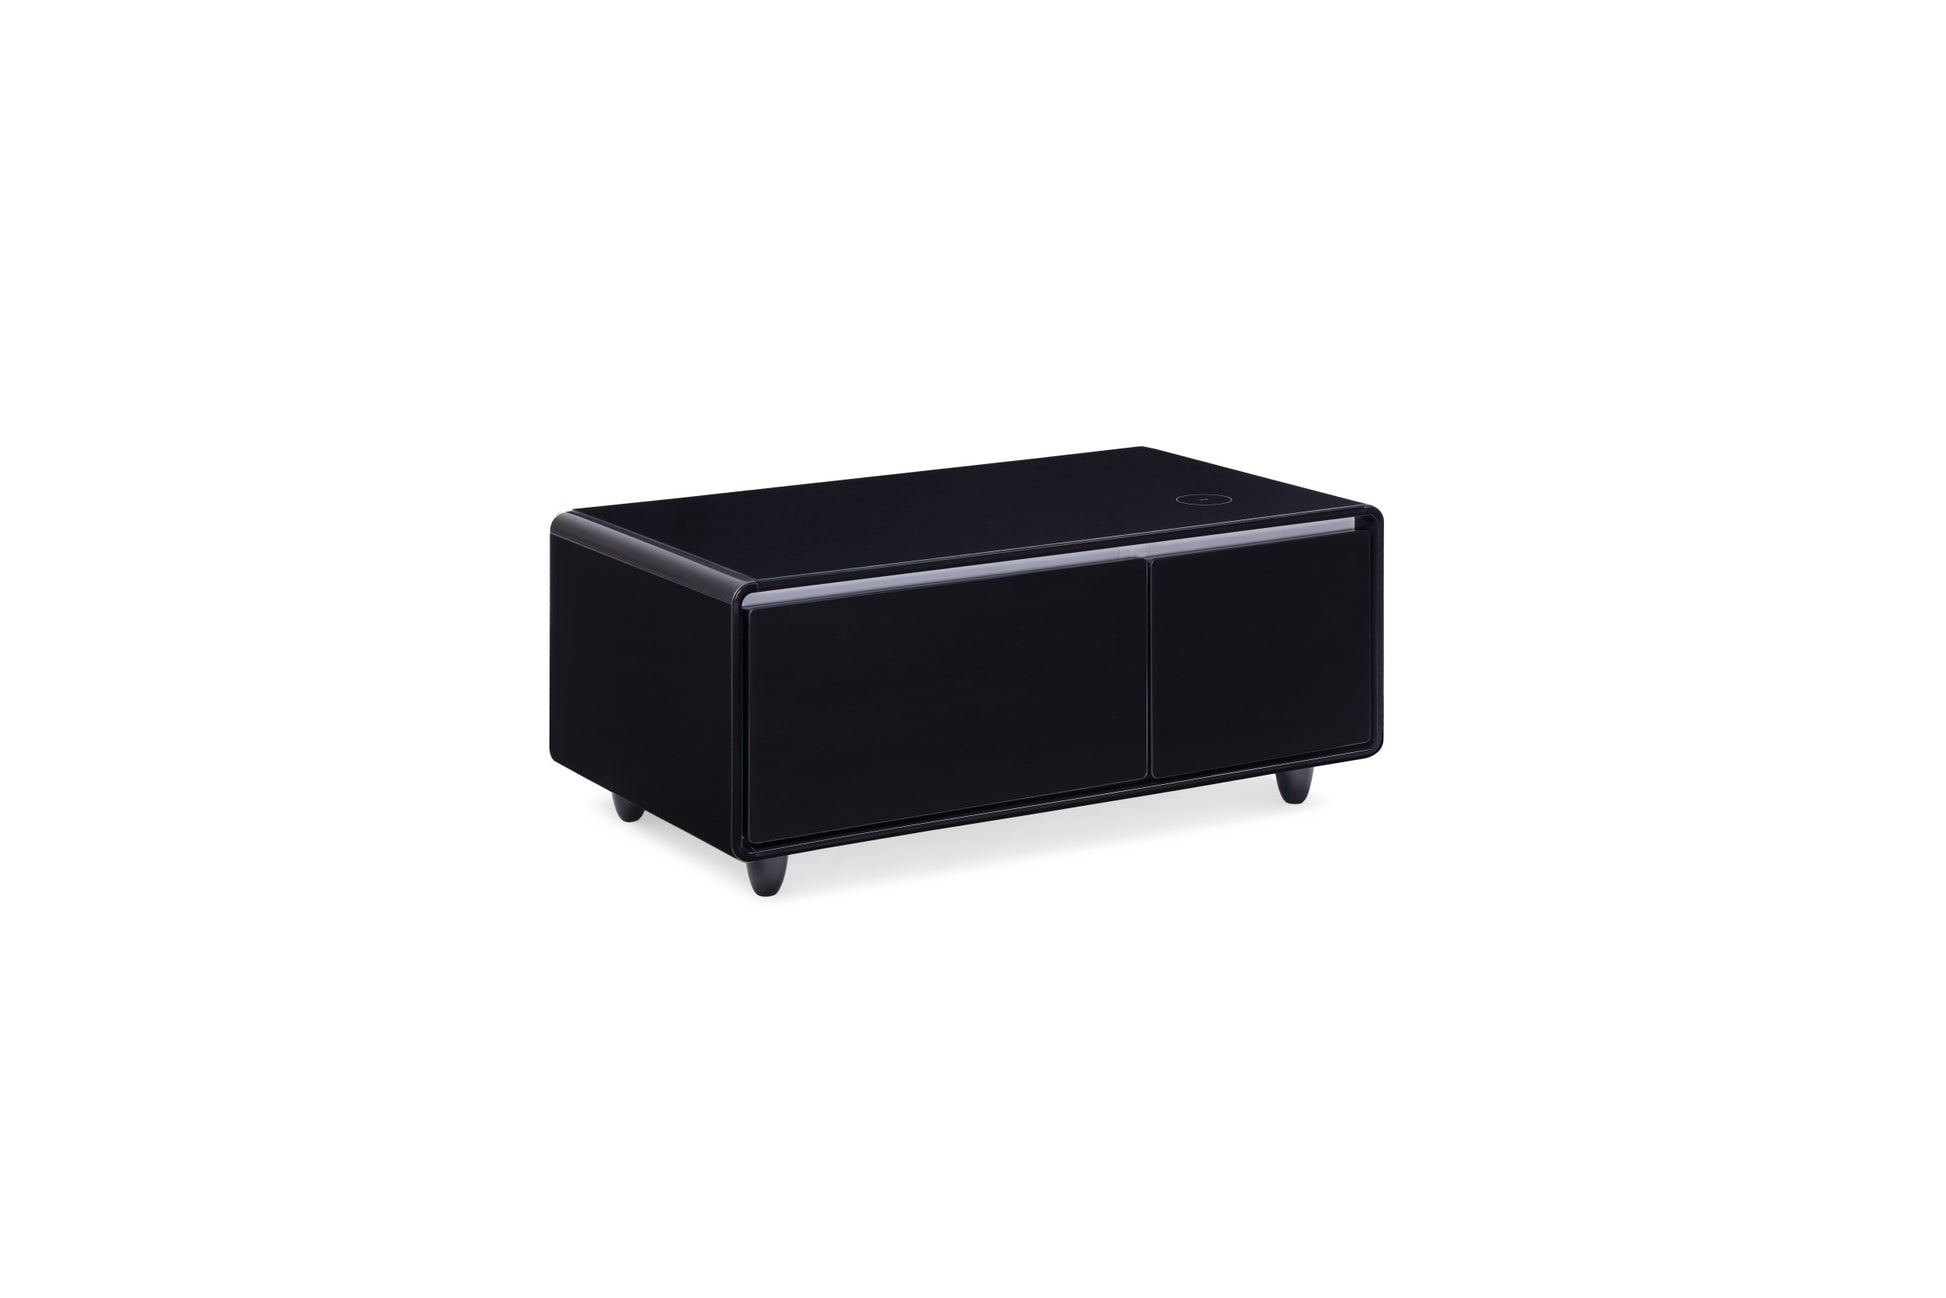 Modern Smart Coffee Table with Built in Fridge black-primary living